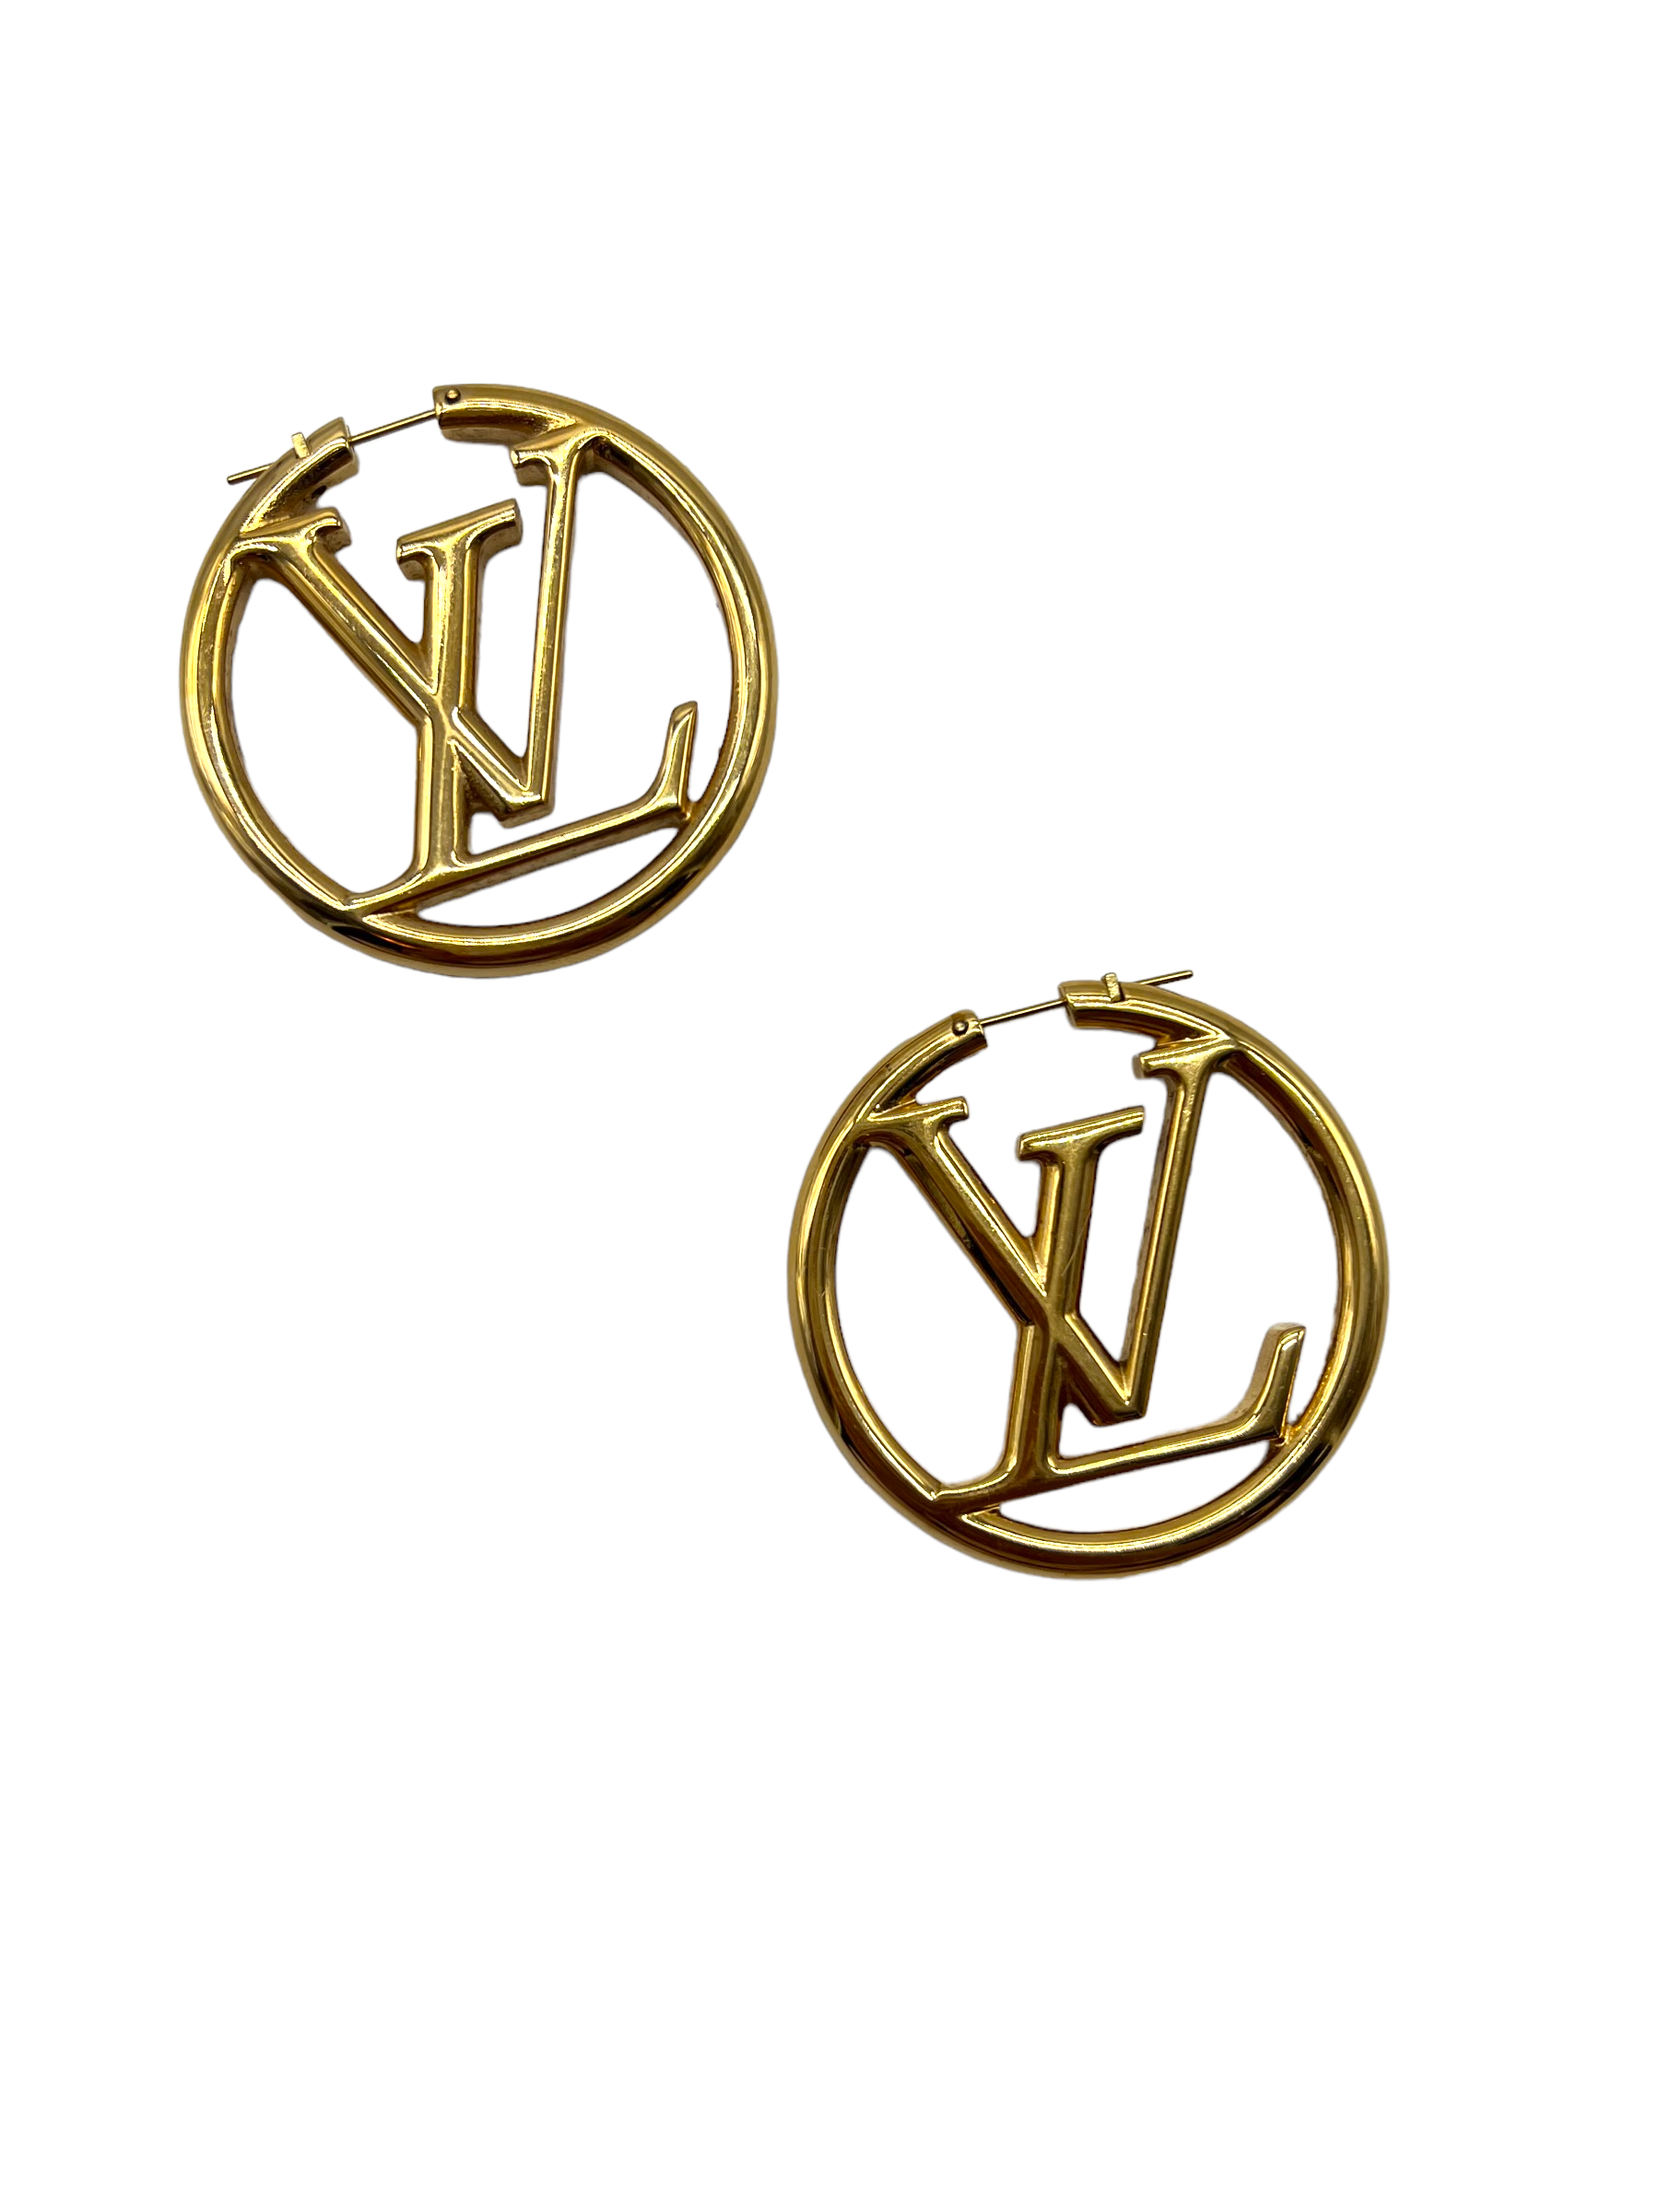 Louis Vuitton Louise Earrings Gold in Gold Metal with Gold-tone - US